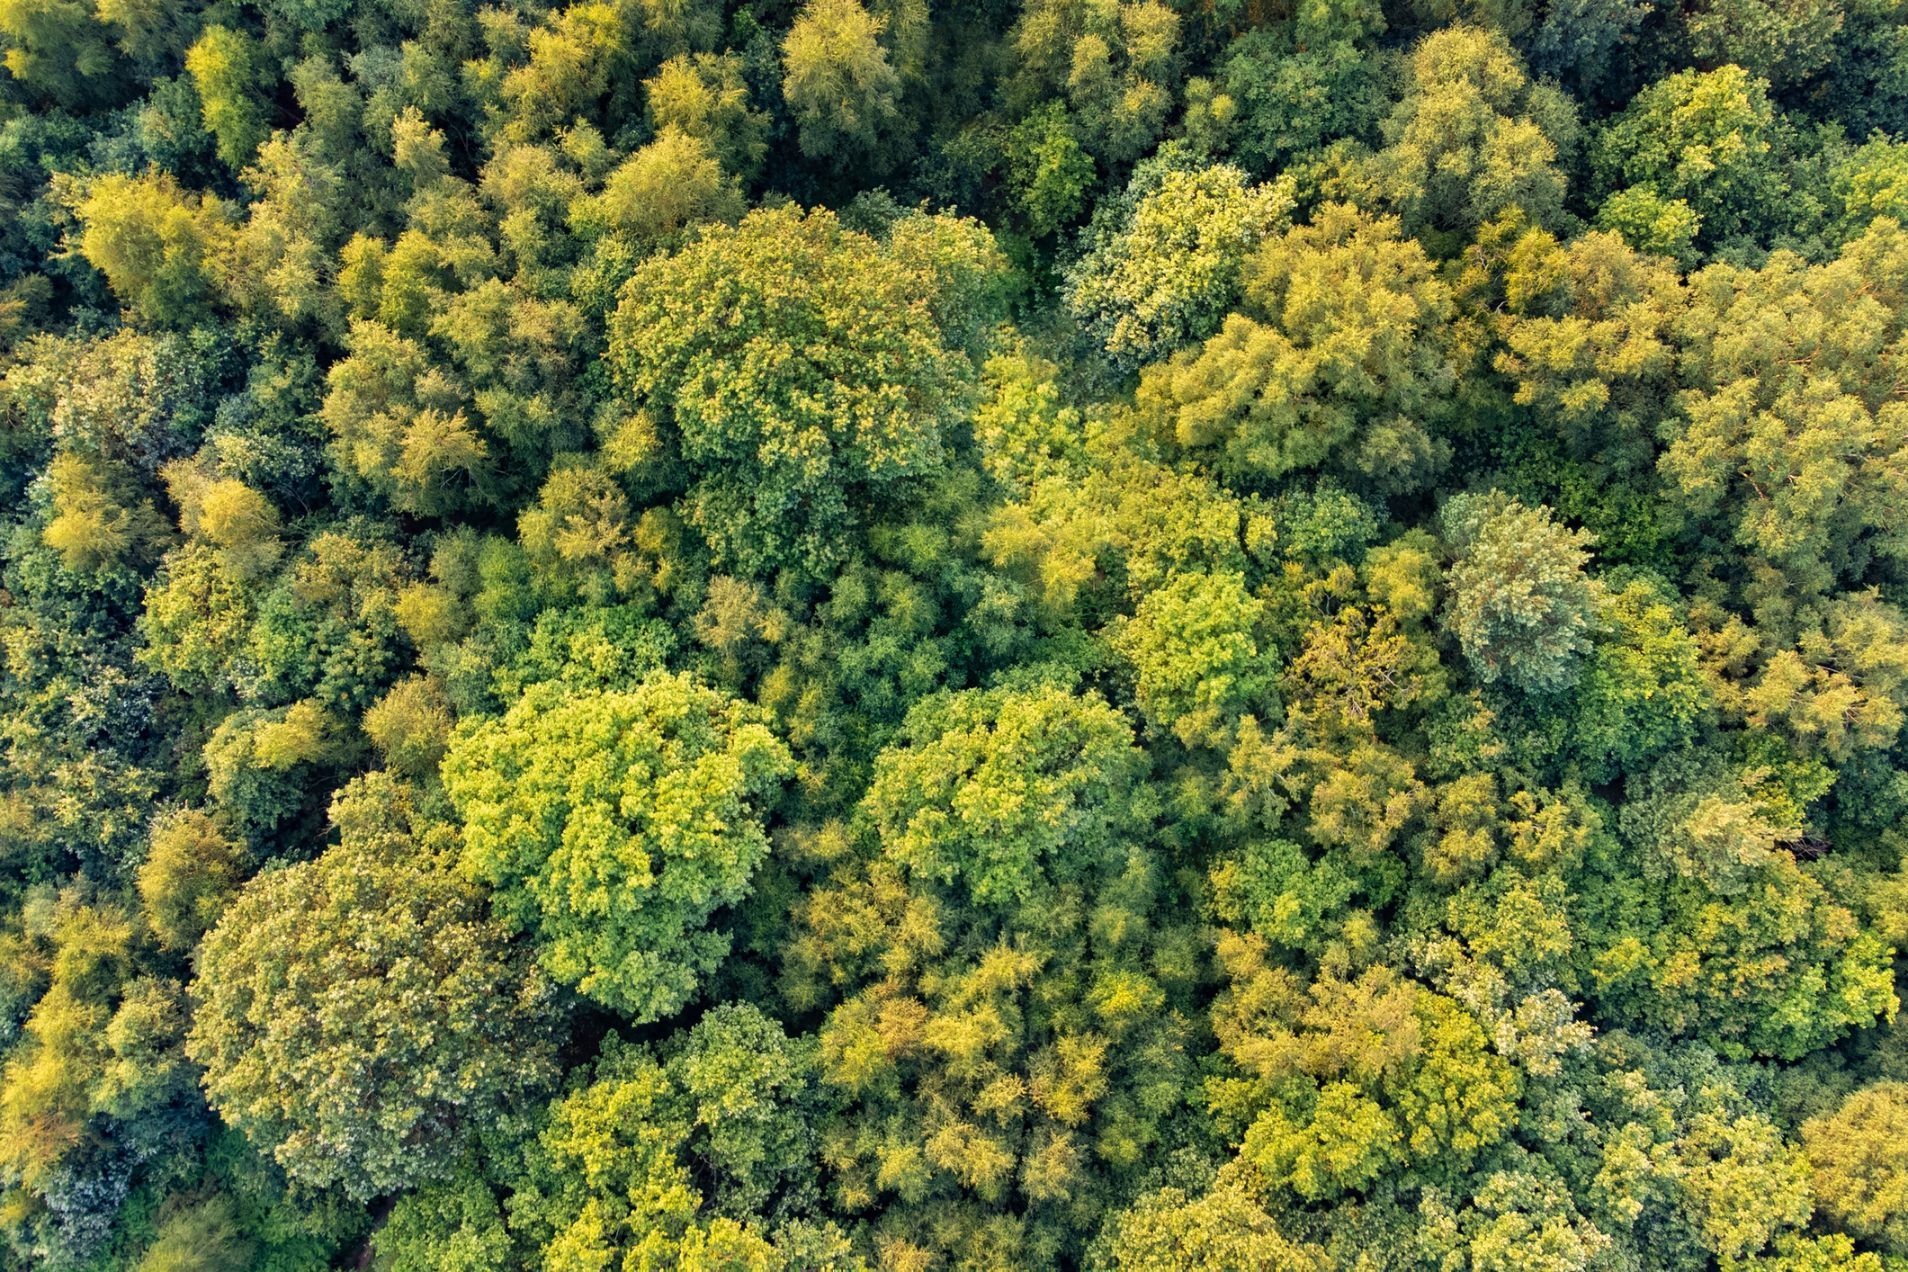 It's thought that the amount of carbon stored in trees may have been seriously underestimated. Photo: Getty